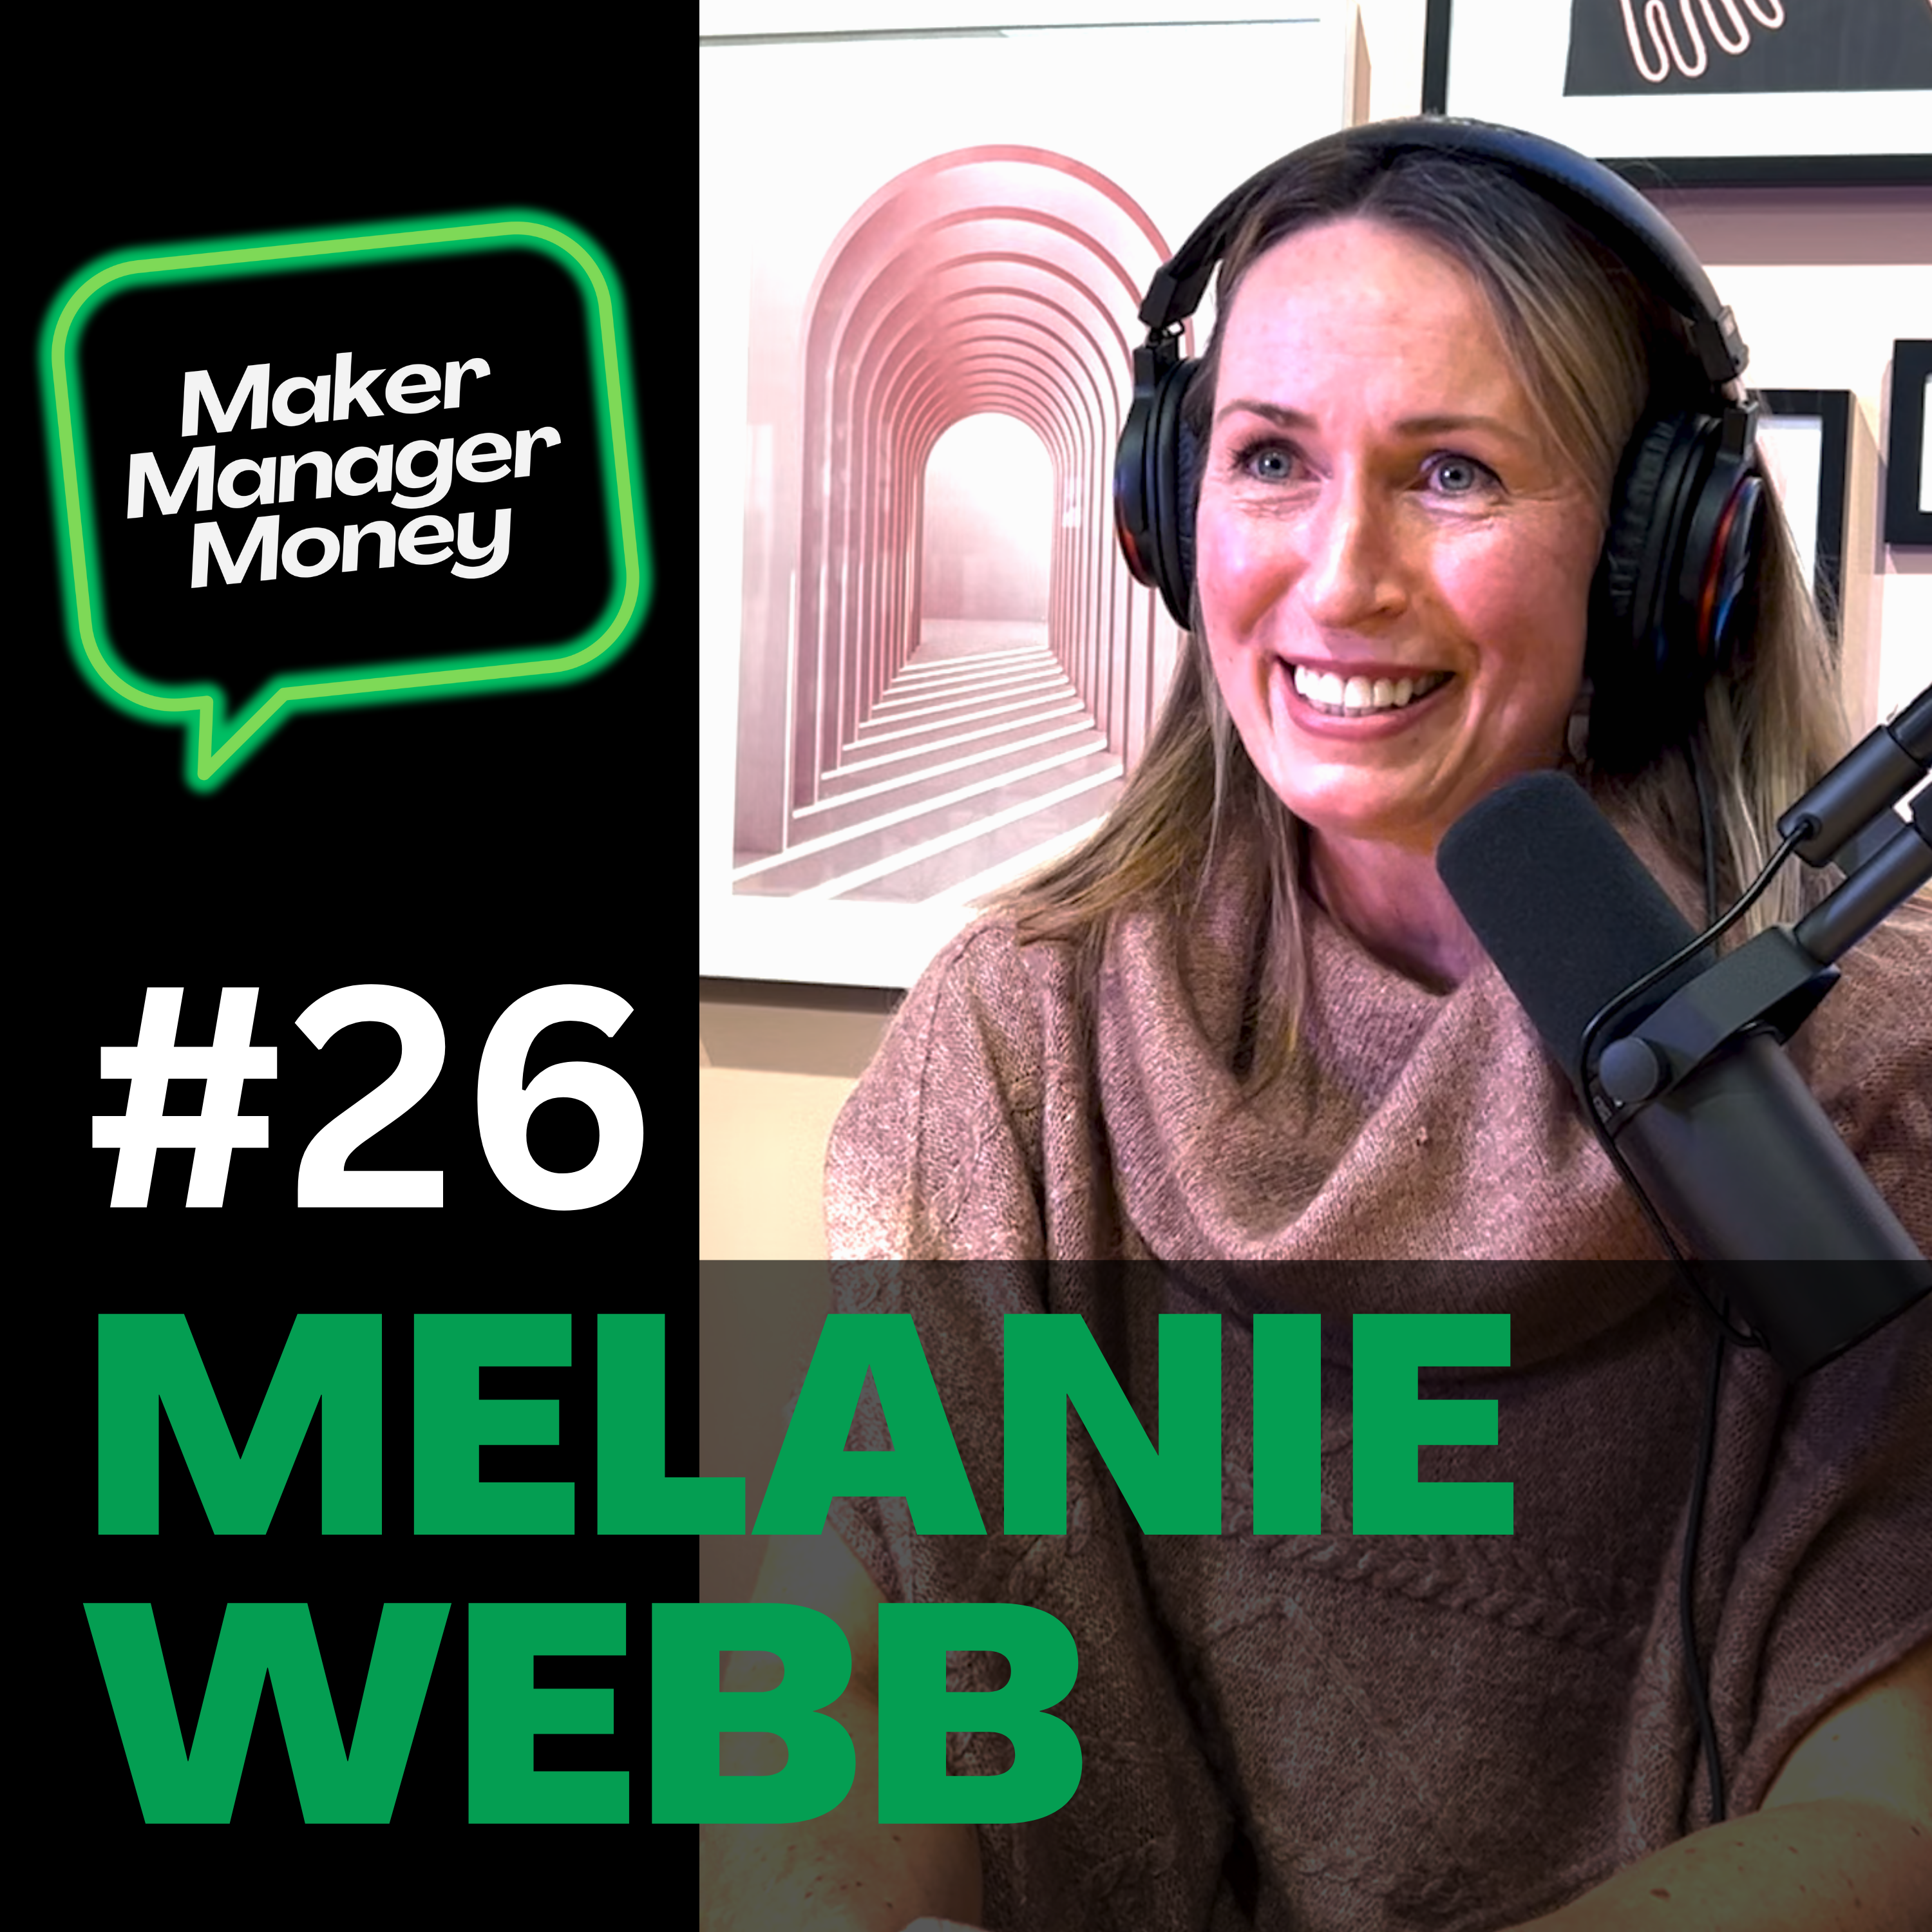 Melanie Webb – using technology & Mother Nature’s gym to transform bodies, minds, and souls